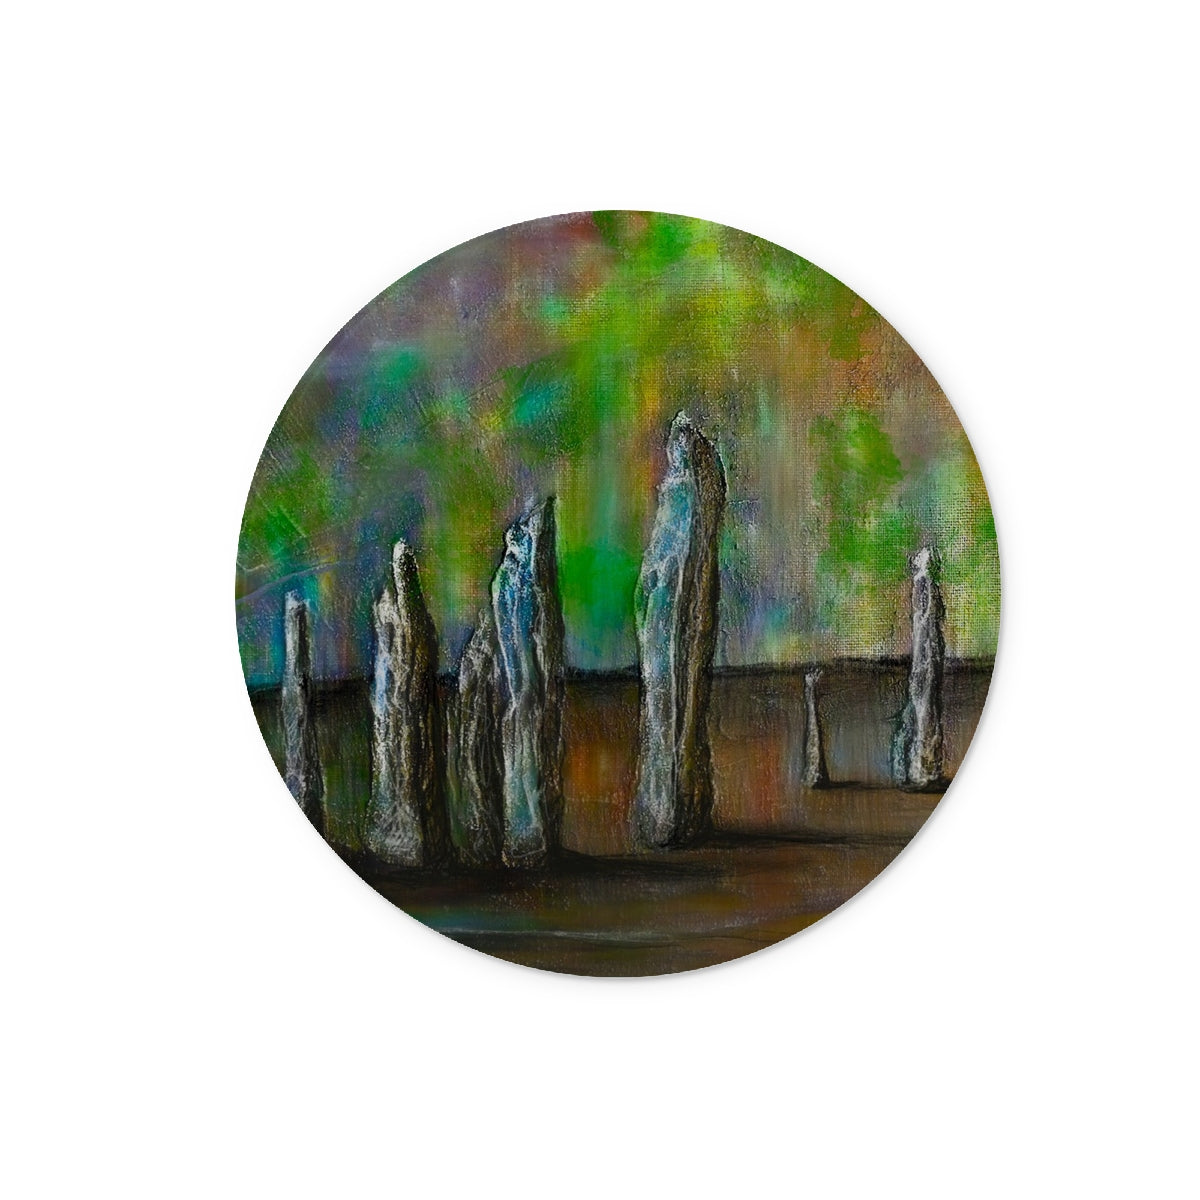 Callanish Northern Lights Art Gifts Glass Chopping Board-Glass Chopping Boards-Hebridean Islands Art Gallery-12" Round-Paintings, Prints, Homeware, Art Gifts From Scotland By Scottish Artist Kevin Hunter